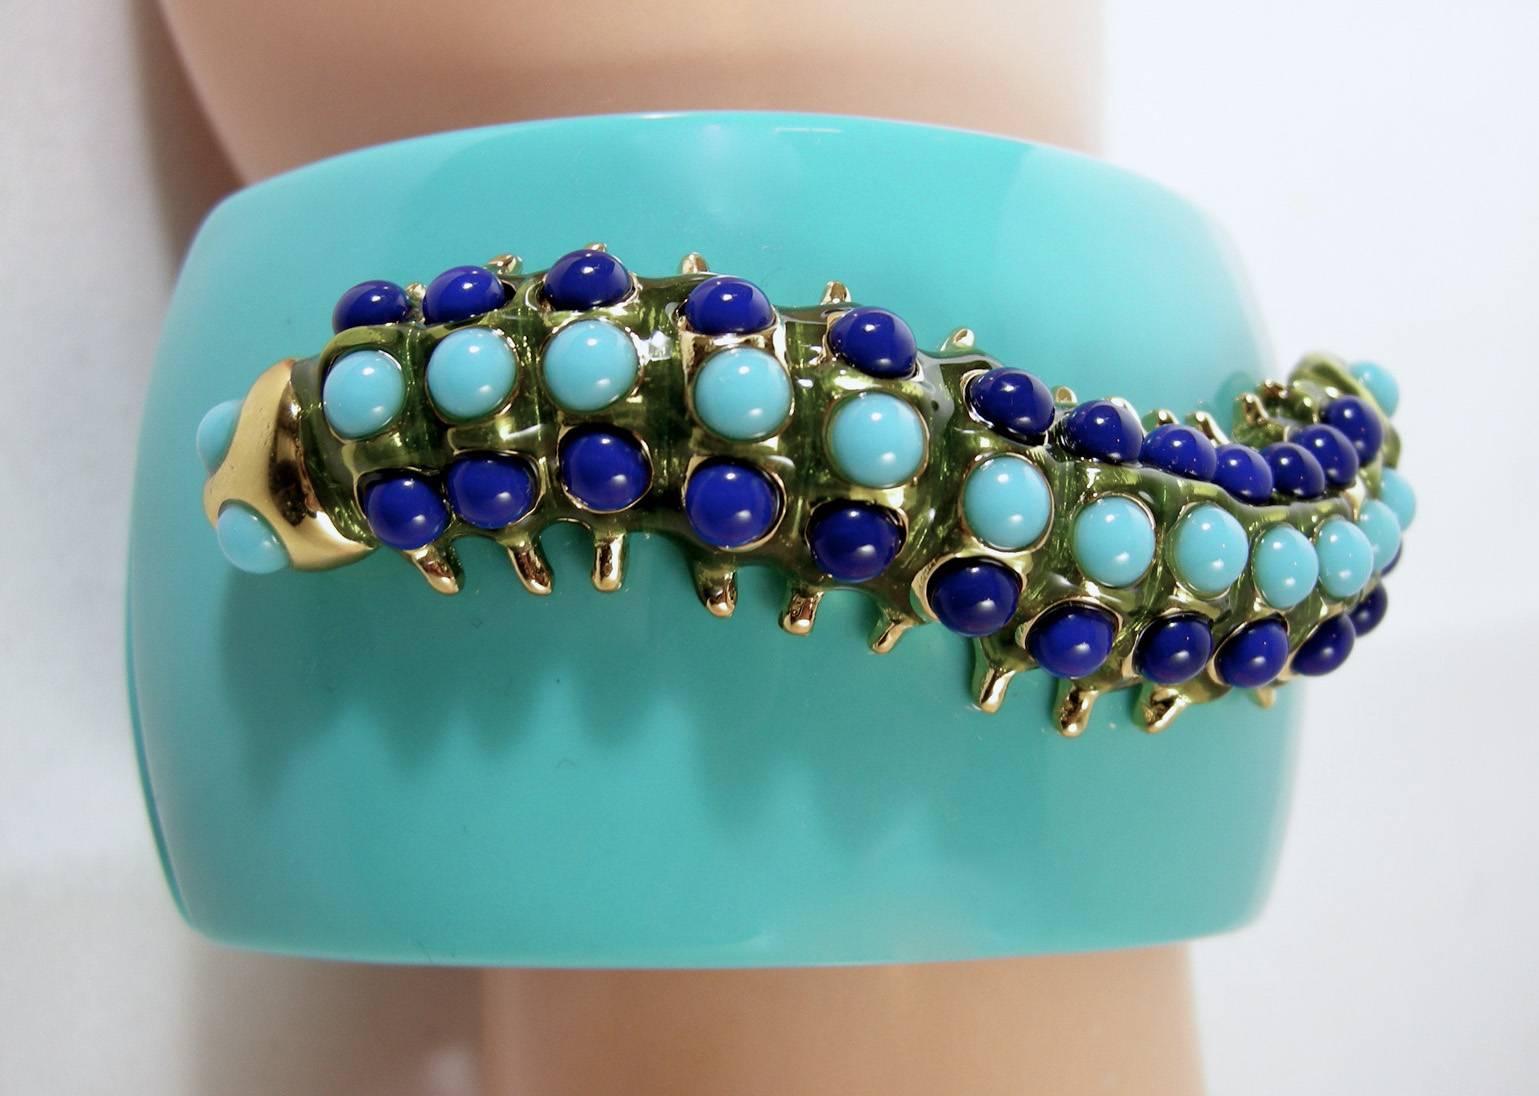 This signed Kenneth Jay Lane clamper bracelet features faux turquoise plastic with a caterpillar centerpiece with faux lapis & turquoise stones in a gold-tone setting.  In excellent condition, clamper bracelet measures 7” x 1-3/4” and is signed